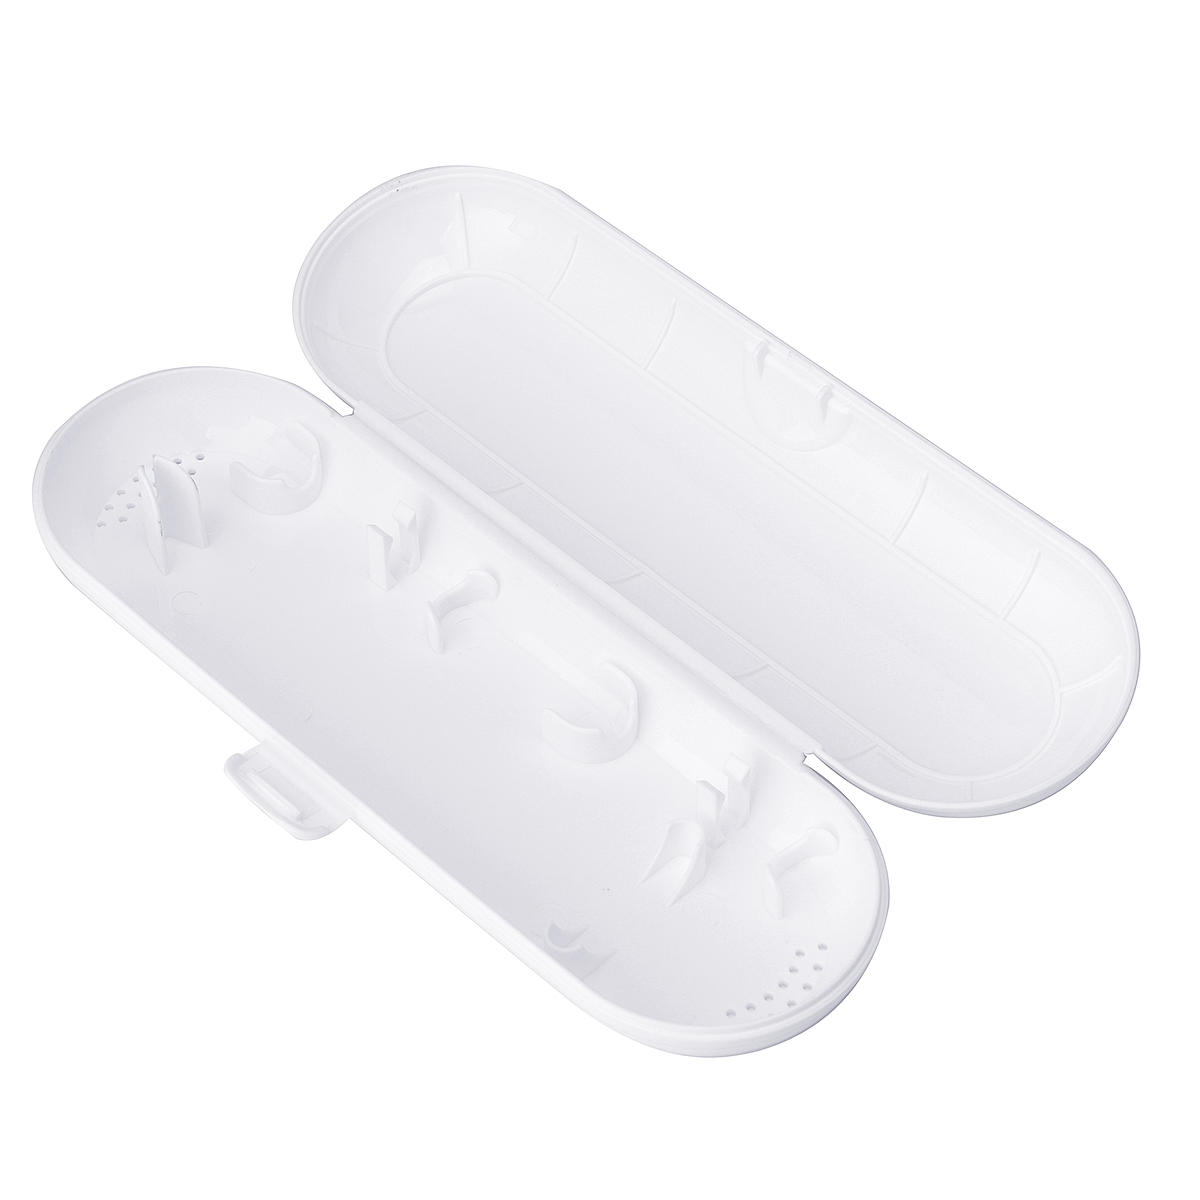 xiaomi environment friendly pvc toothbrush holder case for soocare soocas x3